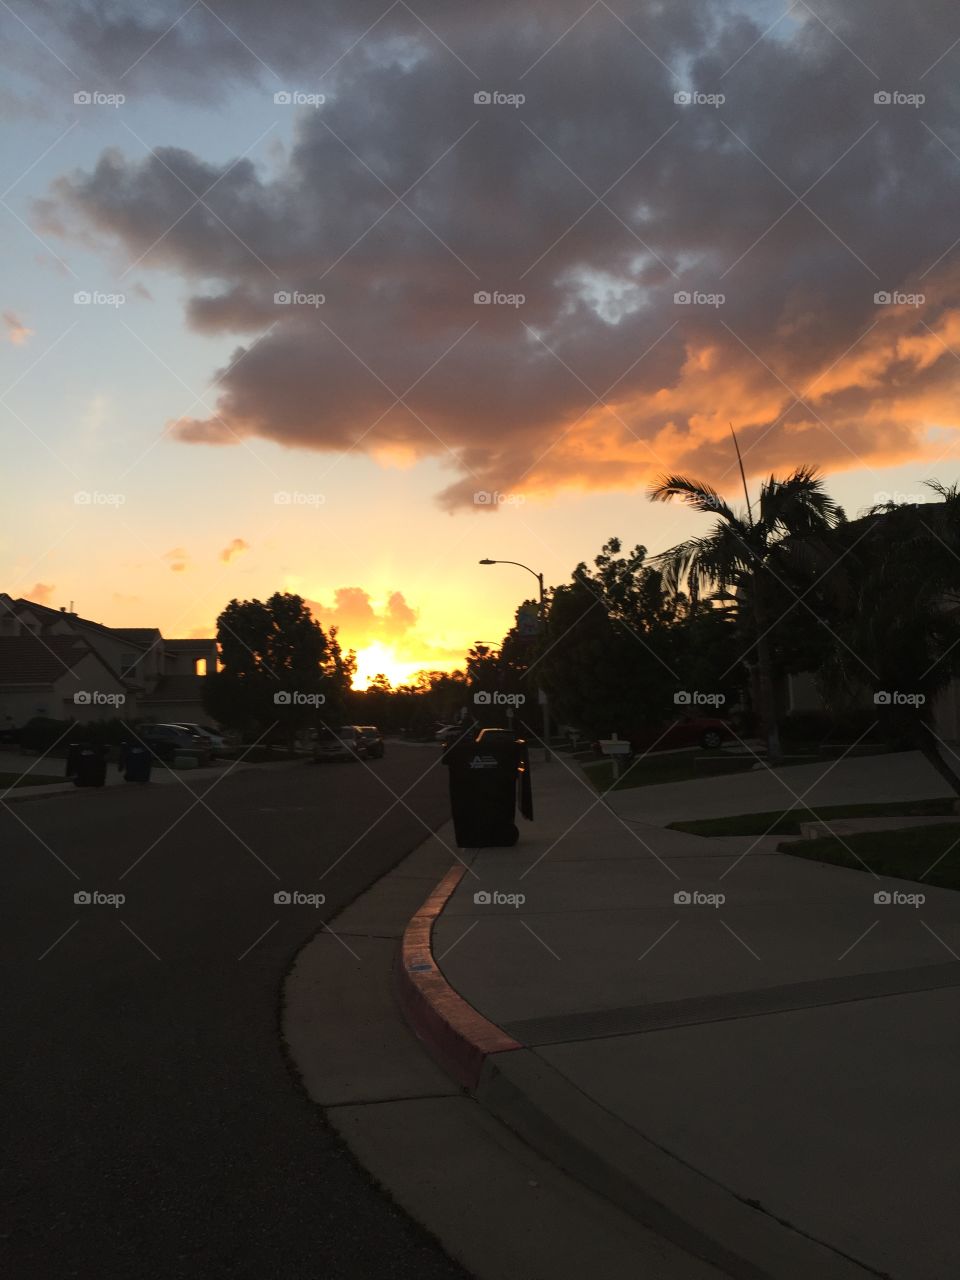 Sunset with clouds and sky. Silhouette of buildings, trees, lamppost, and road. 